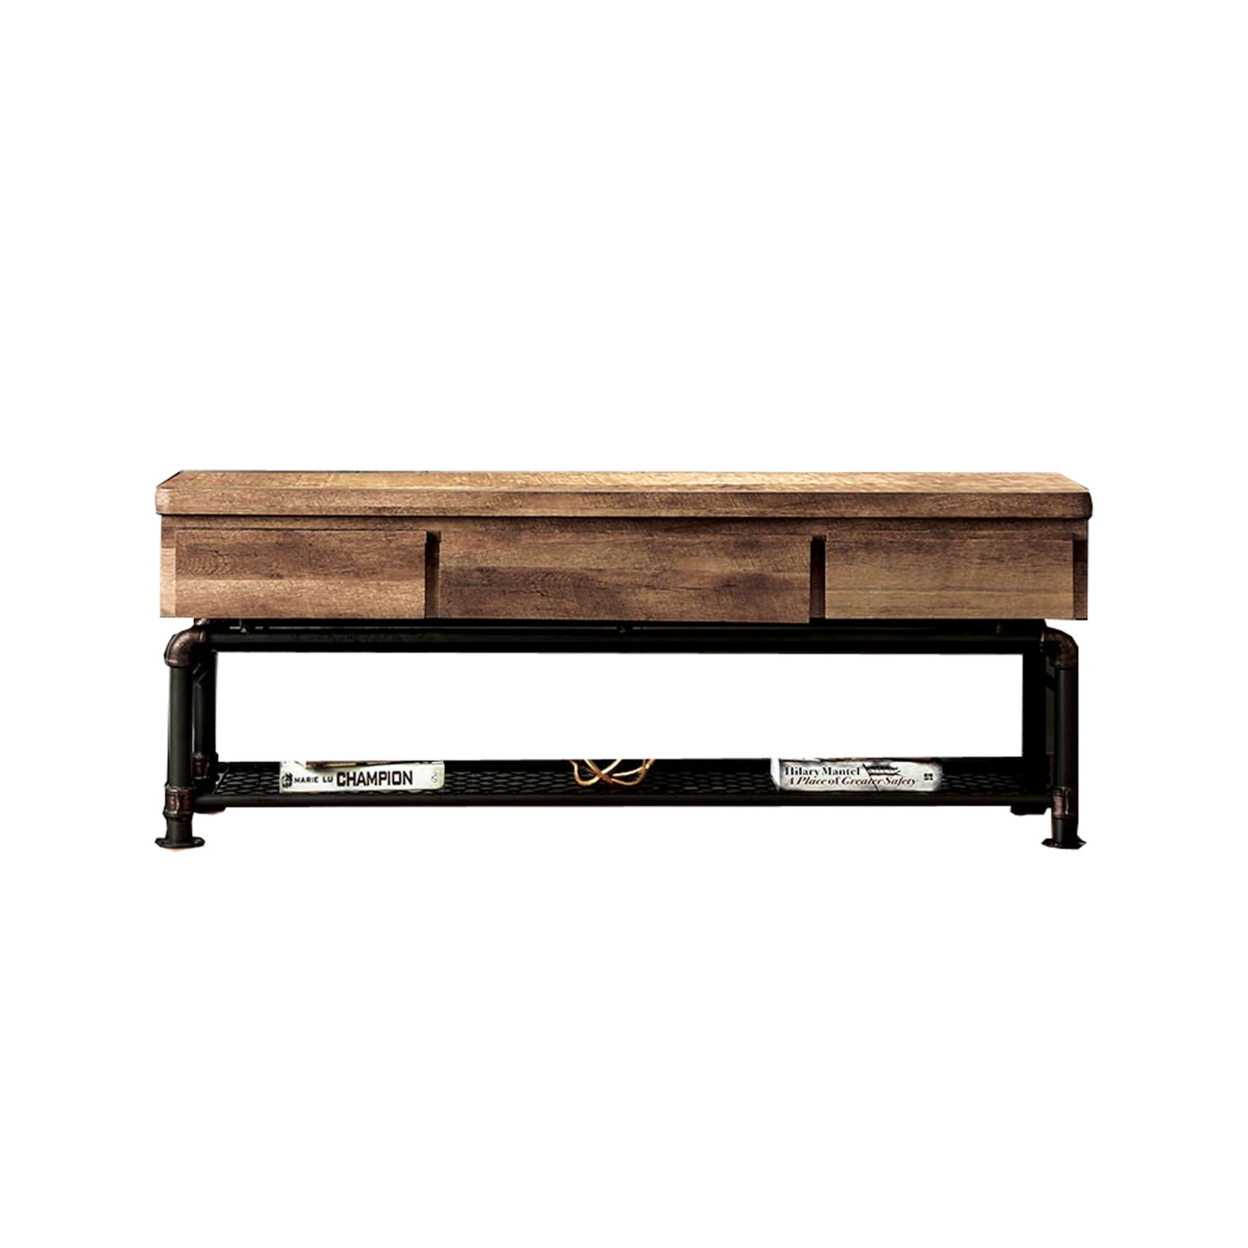 Modern Television Stand With Metal Pipe Inspired Design, Black And Brown- Saltoro Sherpi